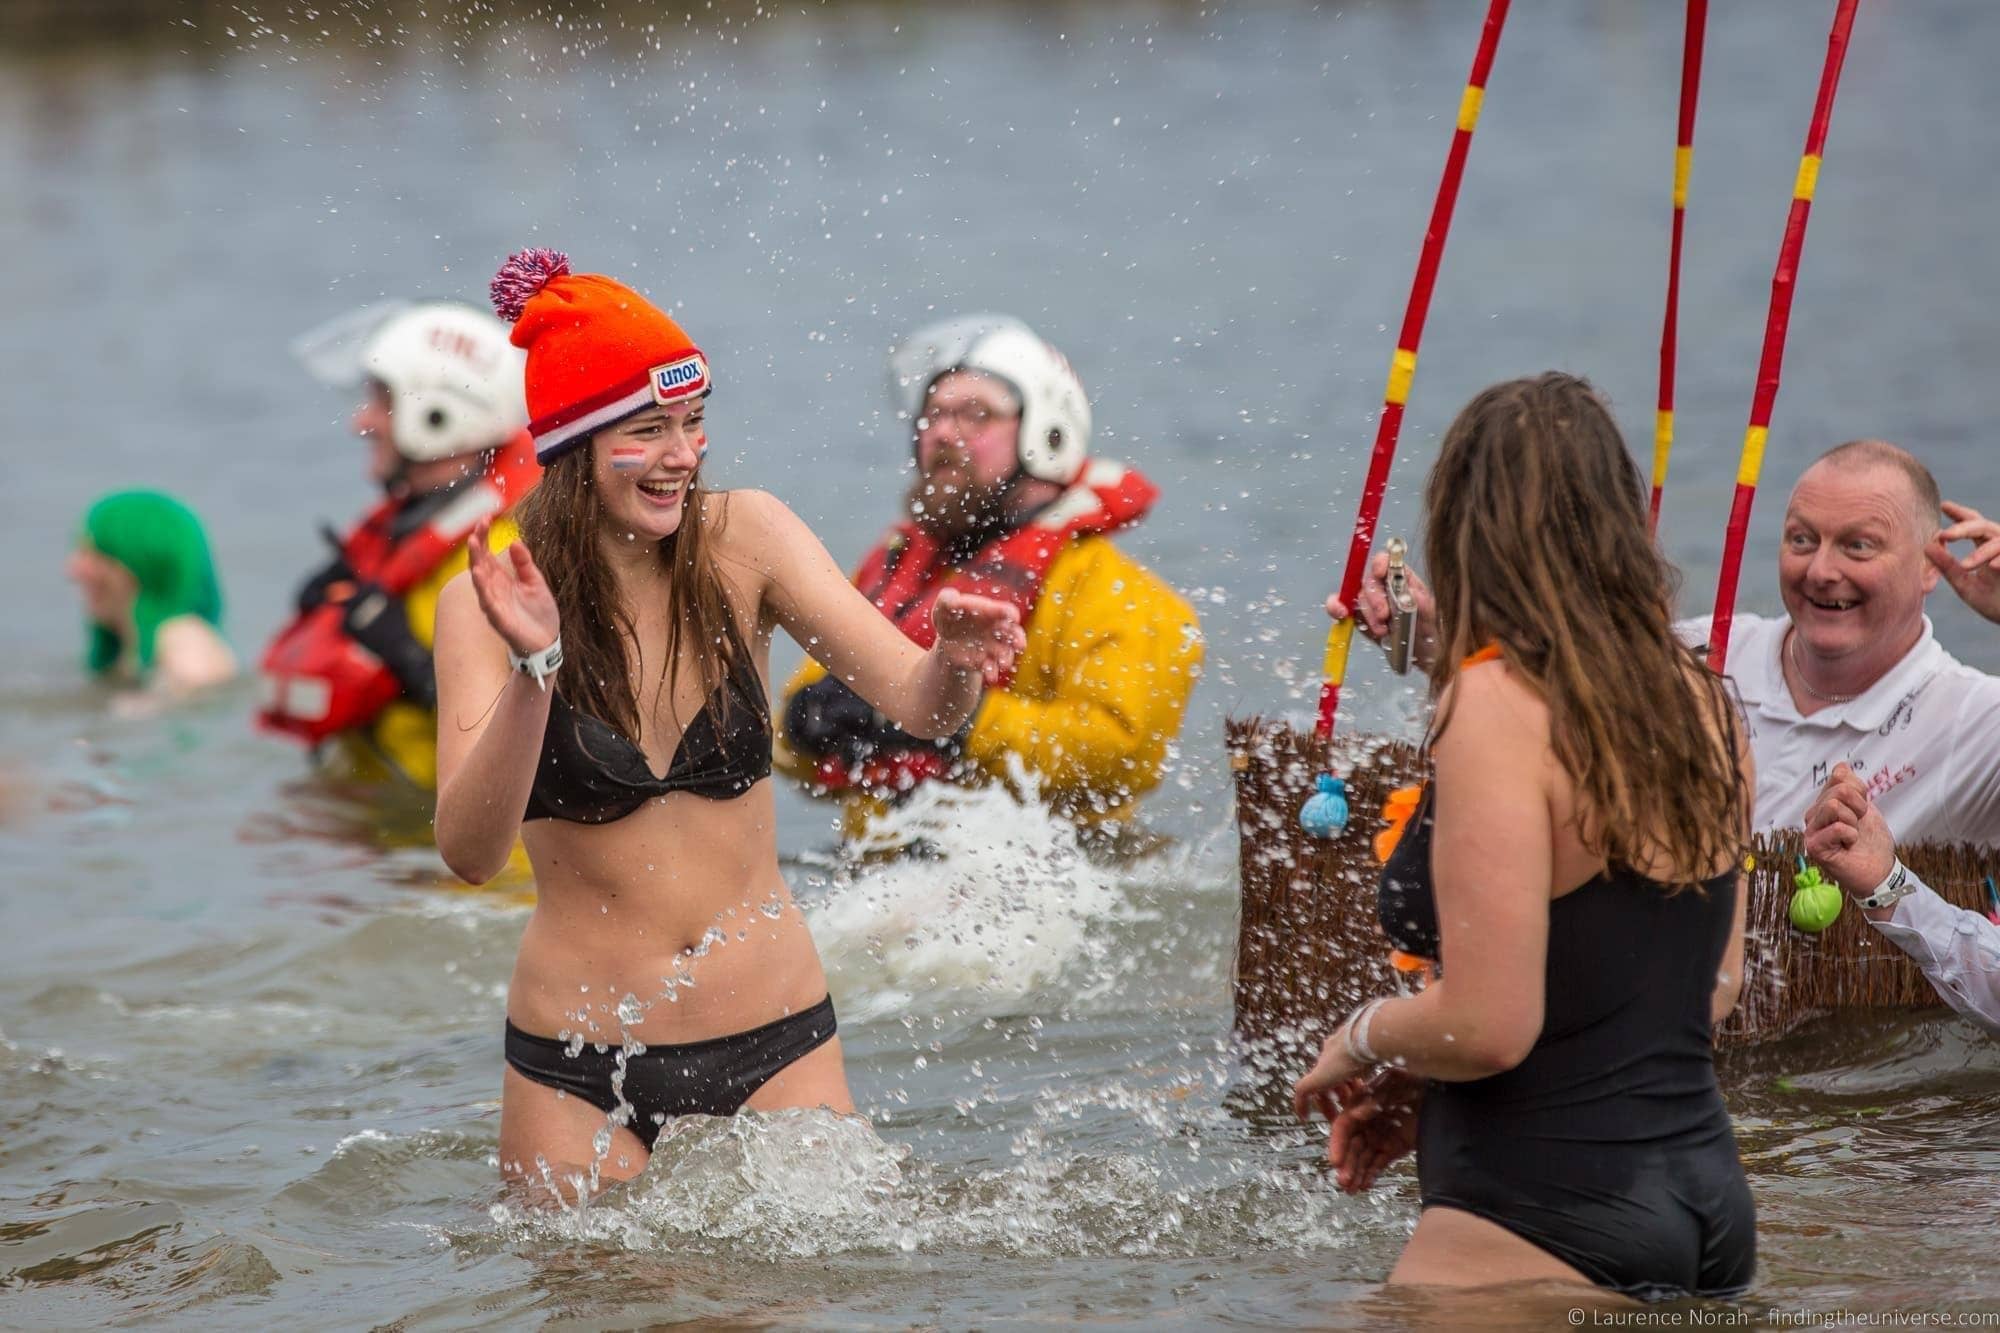 The Loony Dook 2022: Everything You Need To Know!